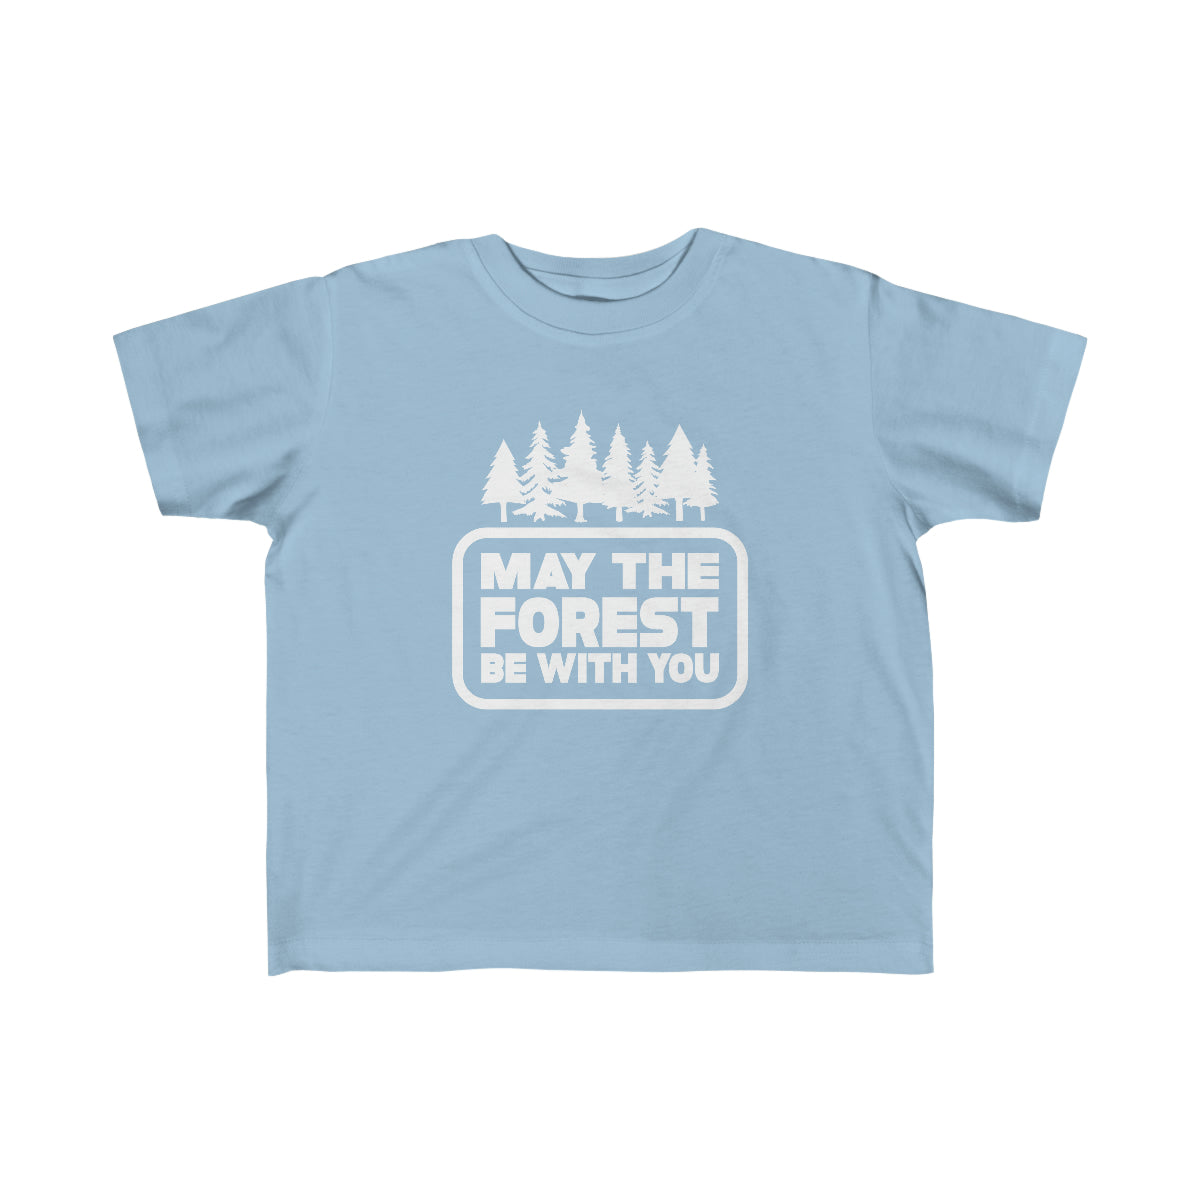 May The Forest Be With You Toddler Tee Light Blue / 2T - The Northwest Store